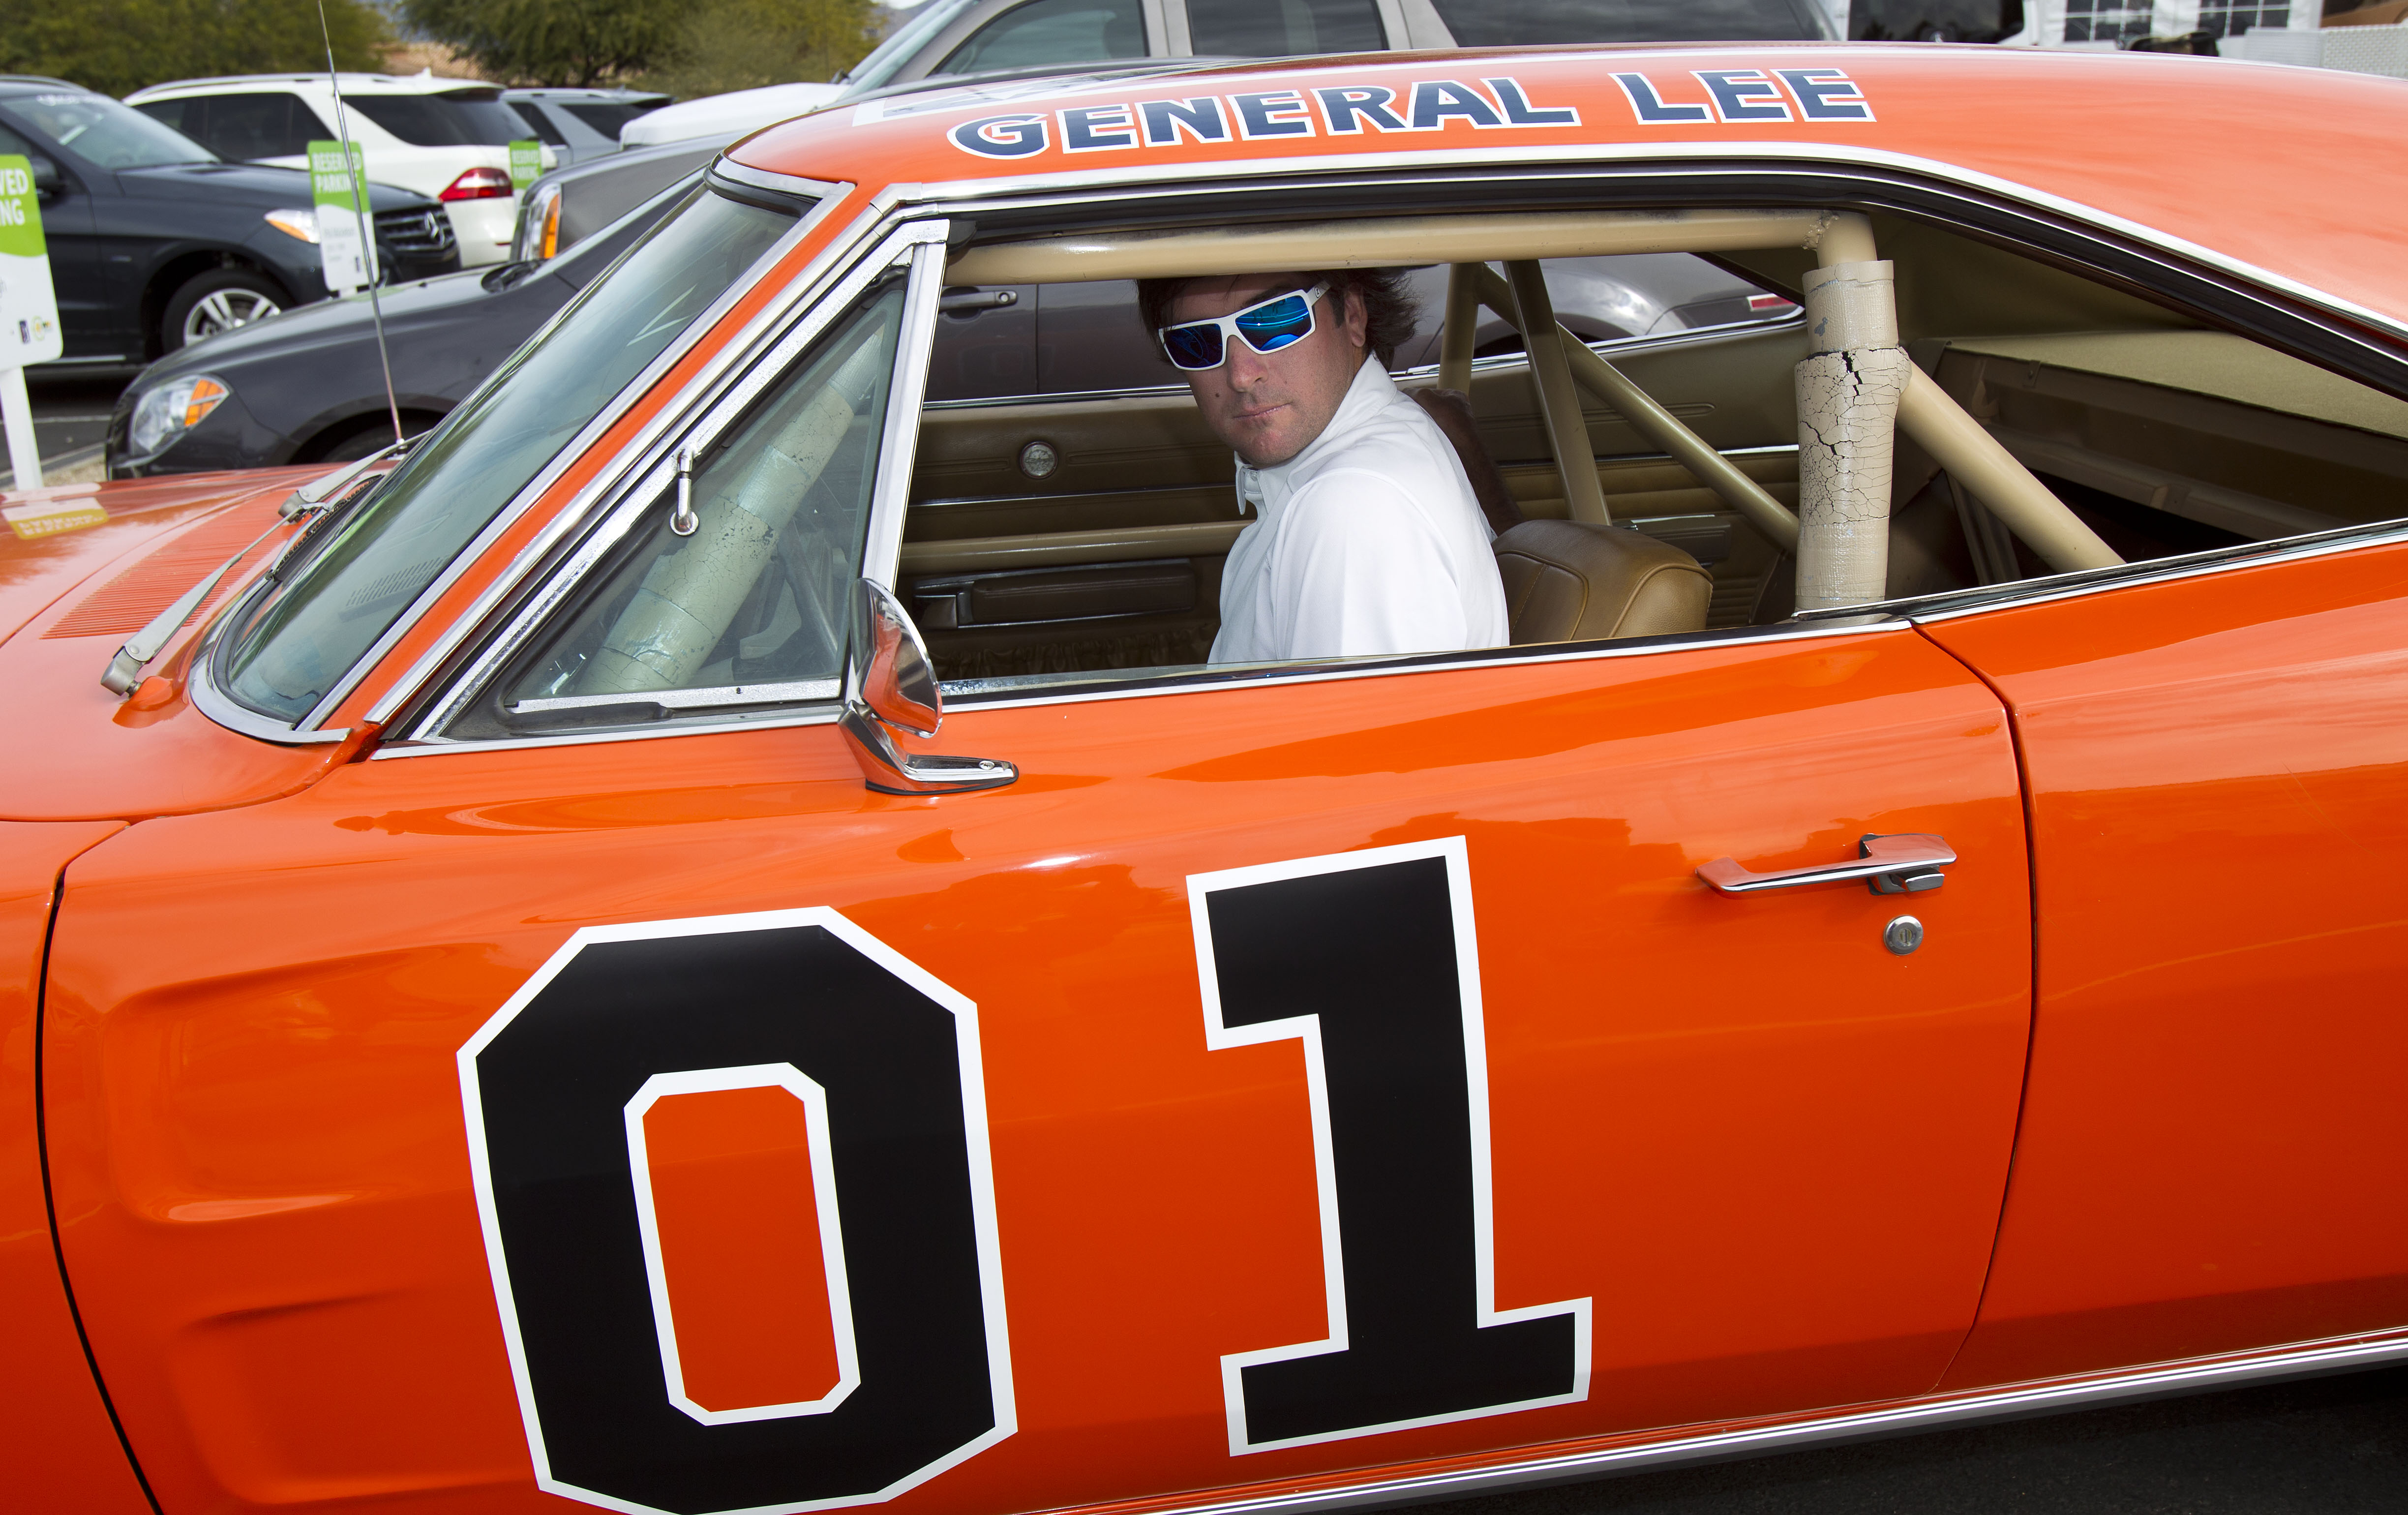 Bubba Watson drives off in the General Lee after playing in the pro-am at the Phoenix Open. (AP)